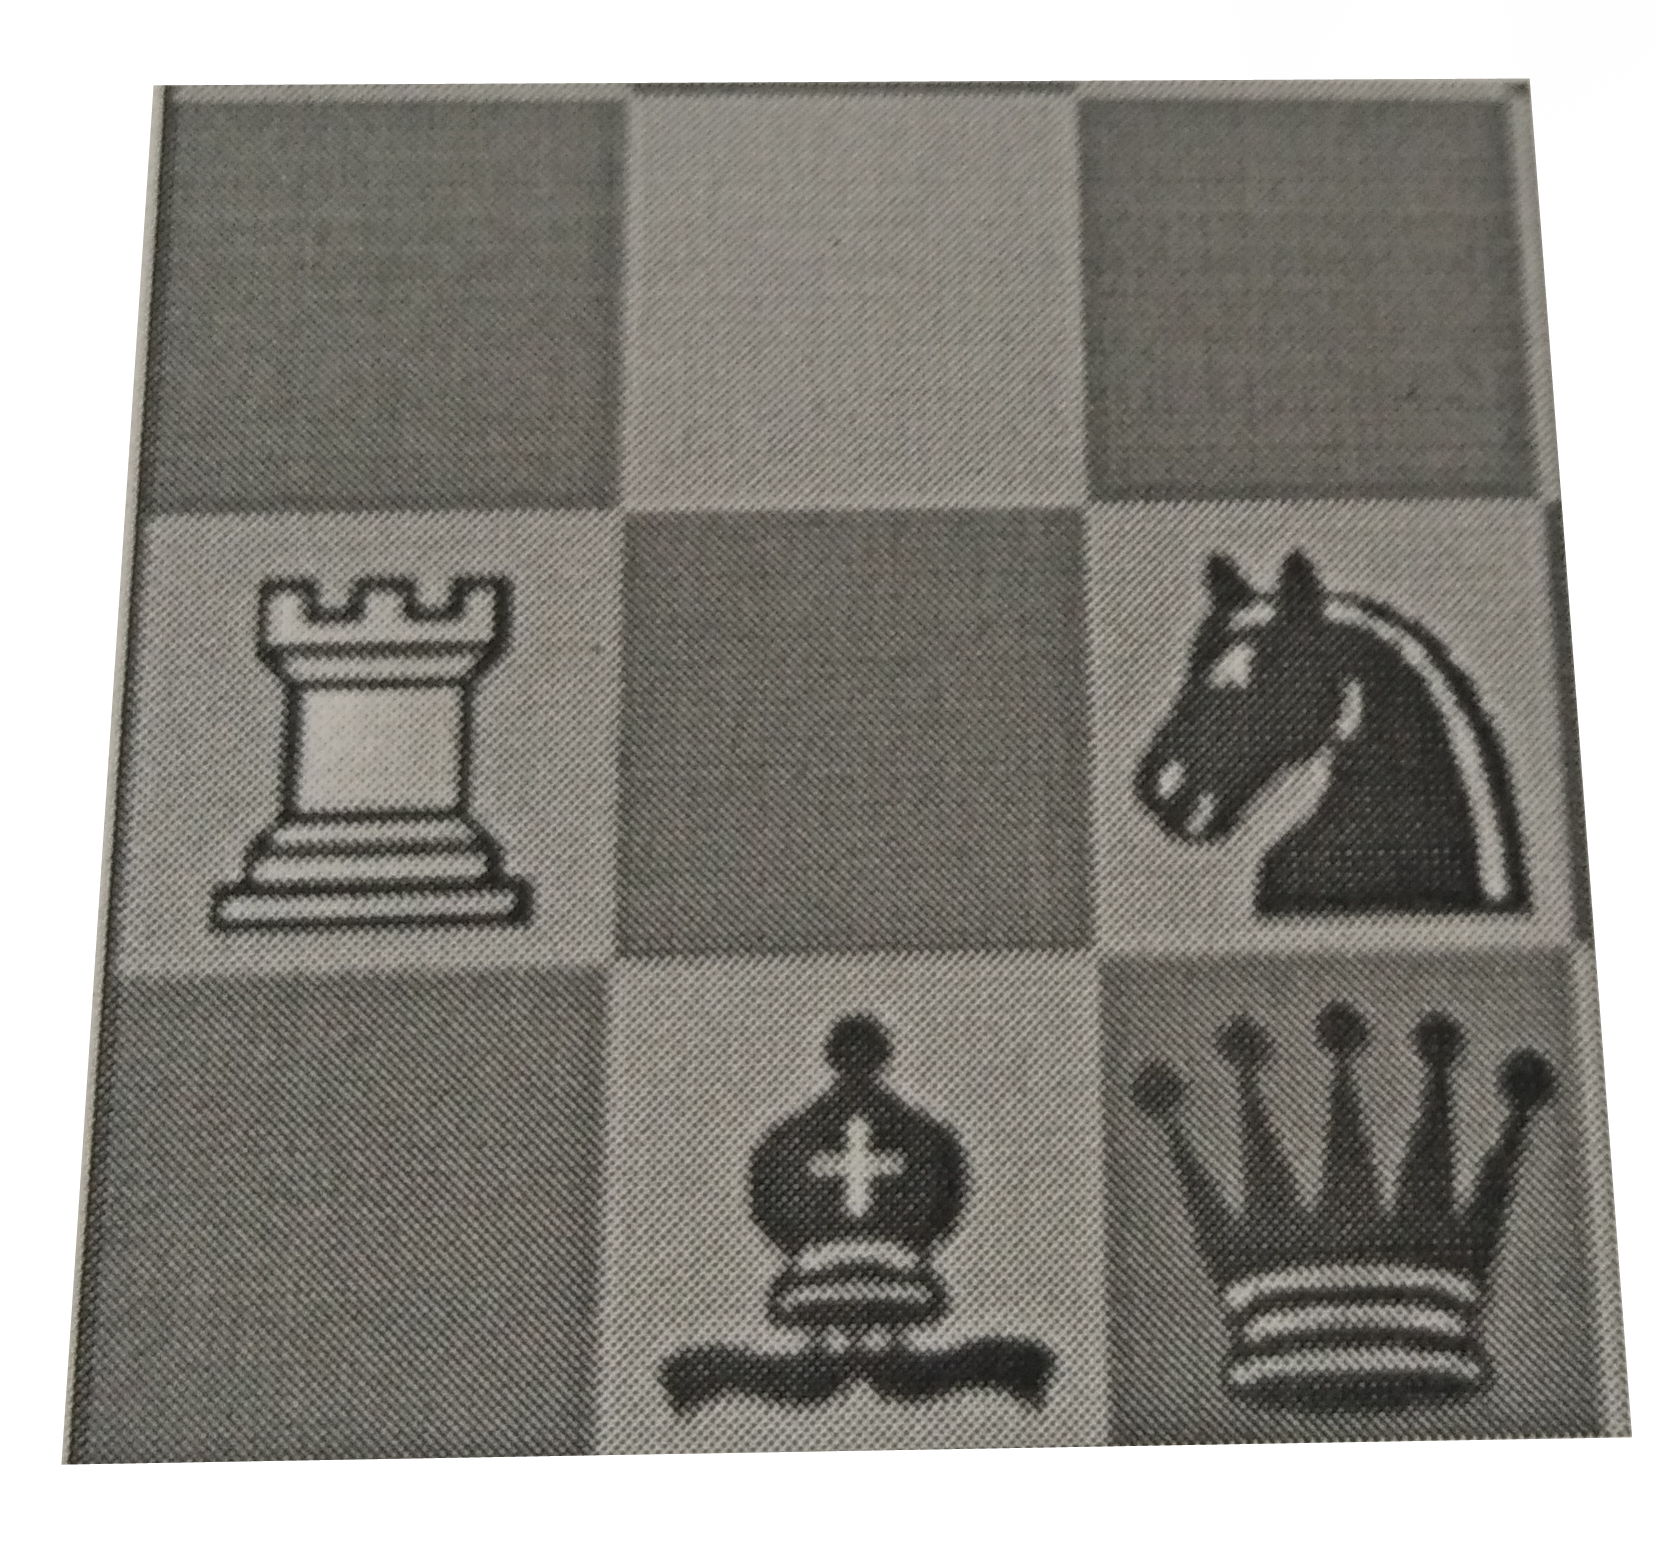 Max is given a 3 xx 3 chessboard. Max is asked to place 2 black rooks, 2 white knights and 1 white bishop on this board in such a way that: a. each piece threatens one or more pieces of the opponent b. each piece is protected by another piece of its own colour c. each piece (except the black queen is under attack by some opponent piece   Let the pieces be assigned numbers as follows: Queen=9, Knight=3, Bishop=3, Rook=5 on black squares and respective negative values on white squares. Find out the ‘sum’ of all pieces in the arranged position.